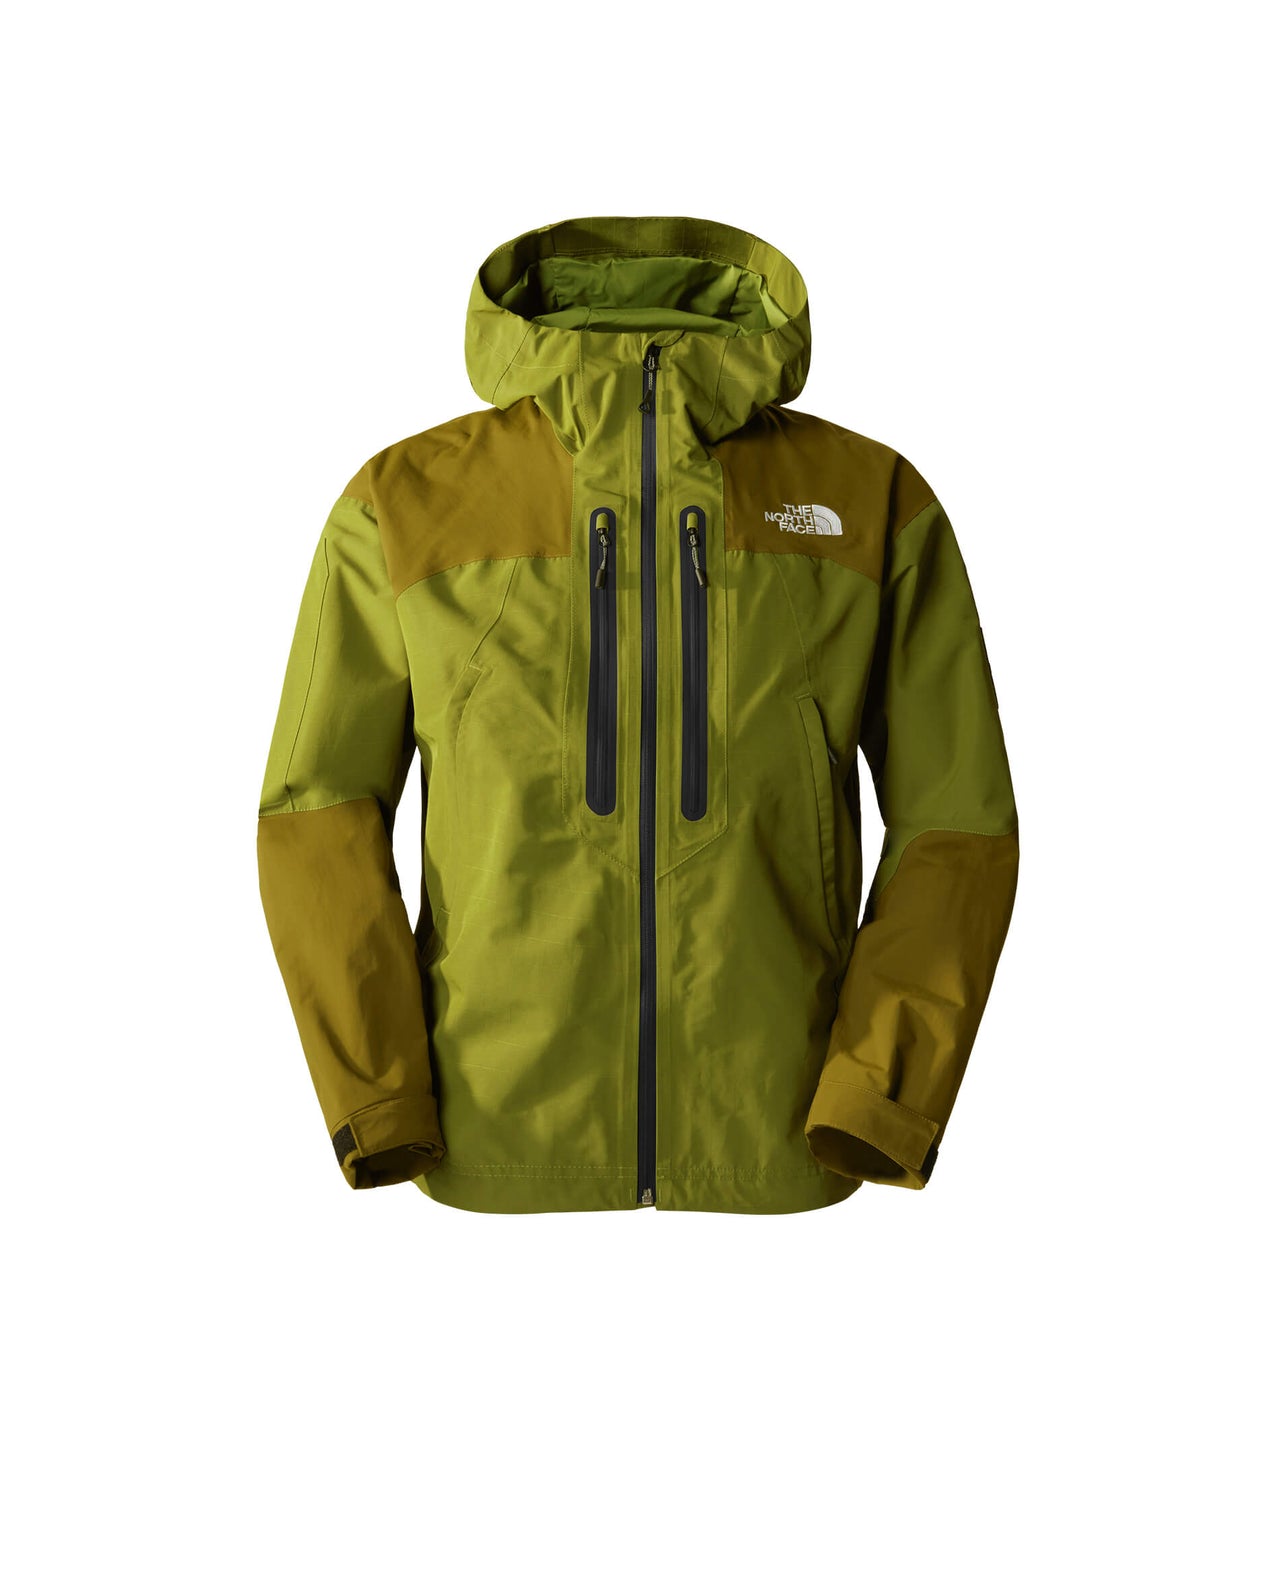 The North Face Transverse 2L Dryvent jacket